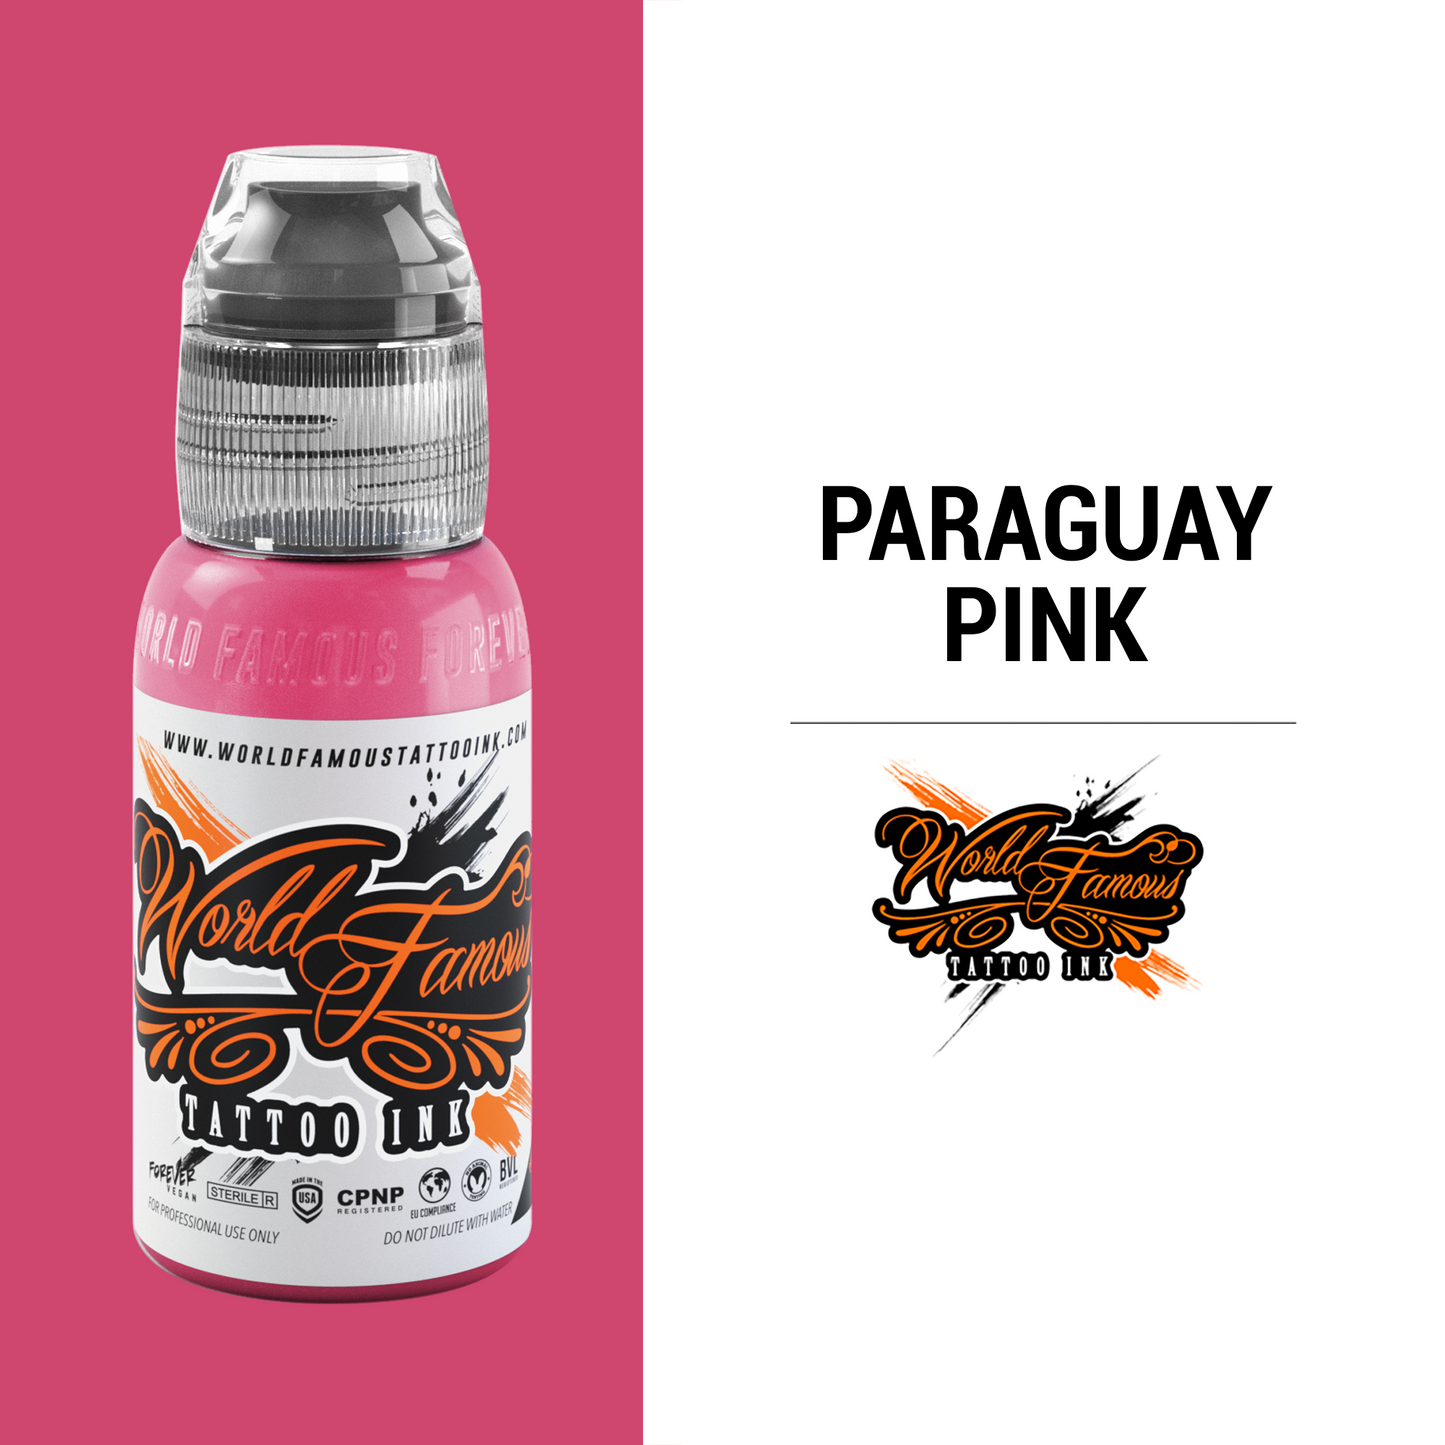 Paraguay Pink - 4oz | World Famous Tattoo Ink